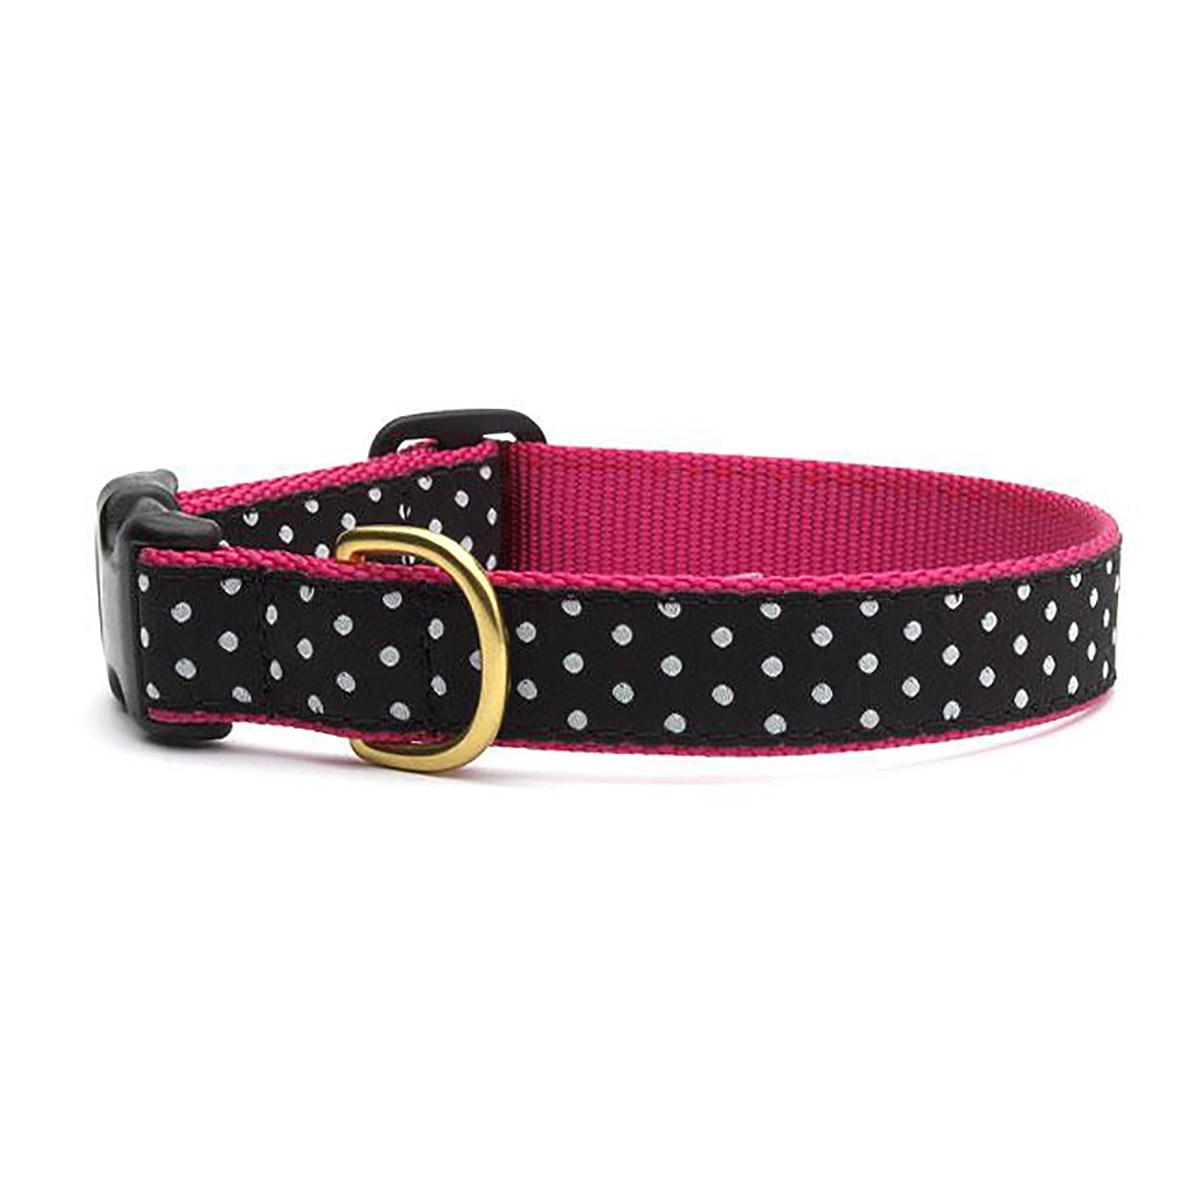 Black and White Dot Dog Collar by Up Country